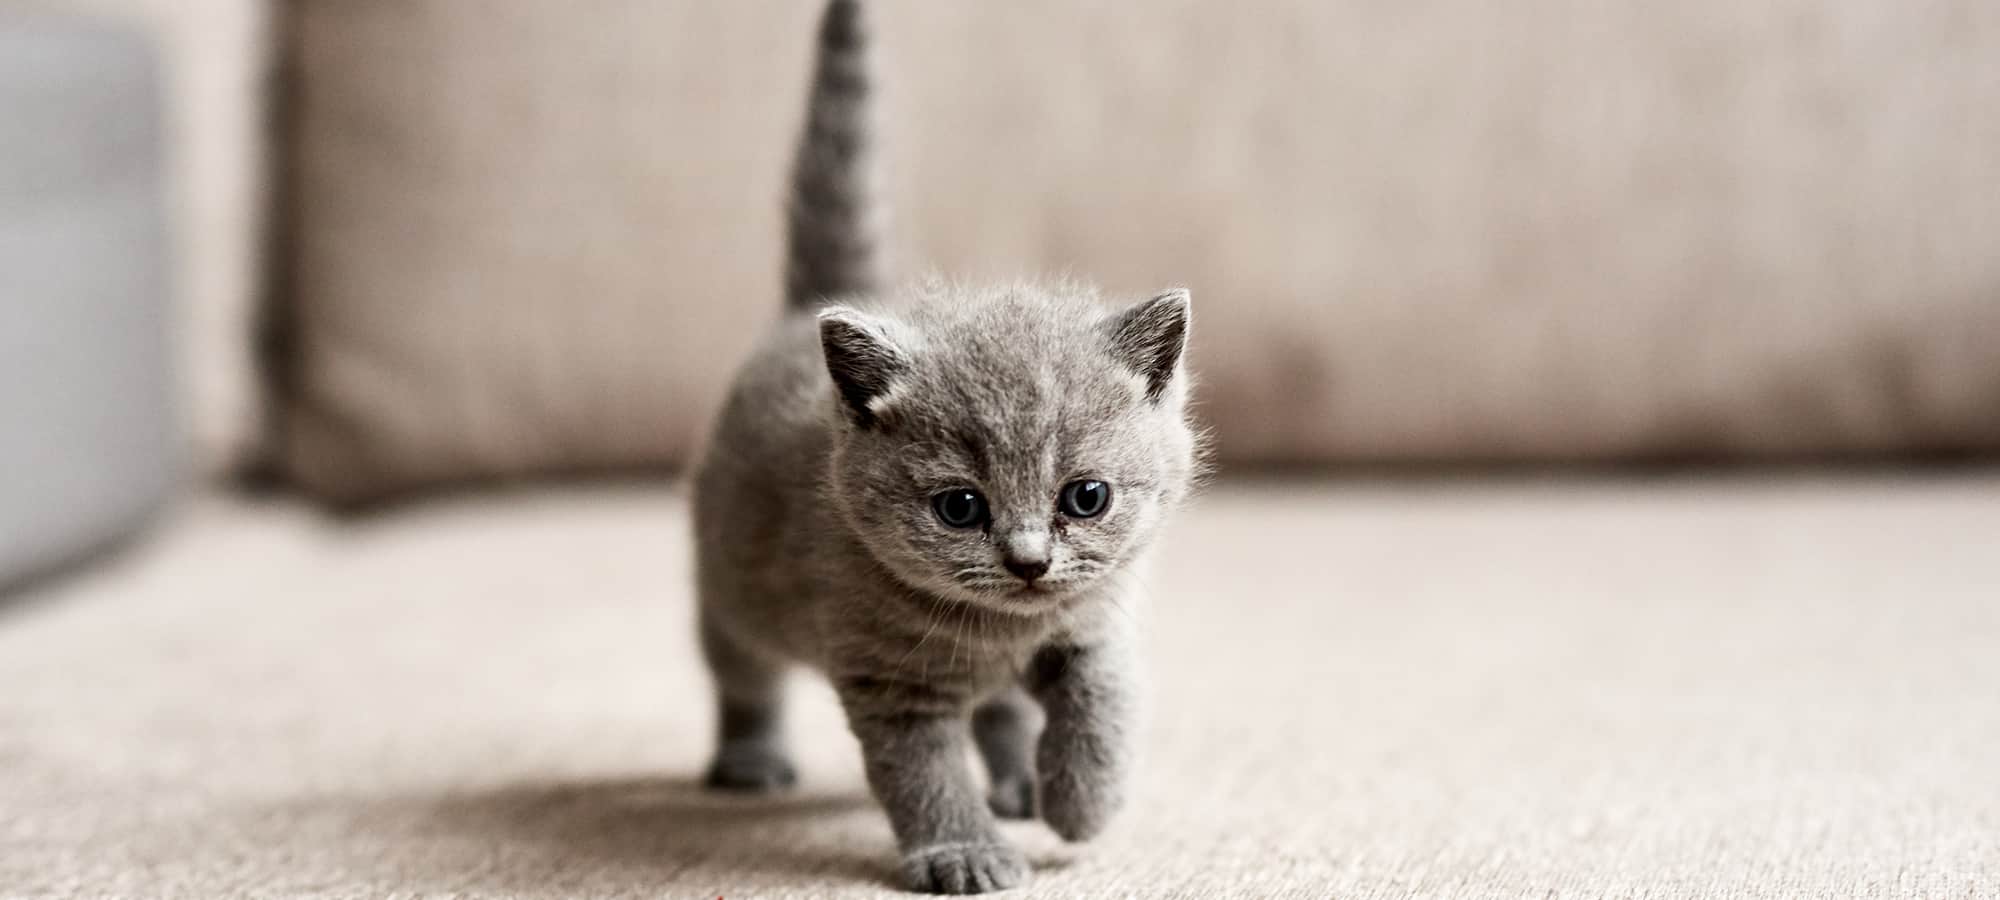 Top Tips for Taking Care of Your New Kitten